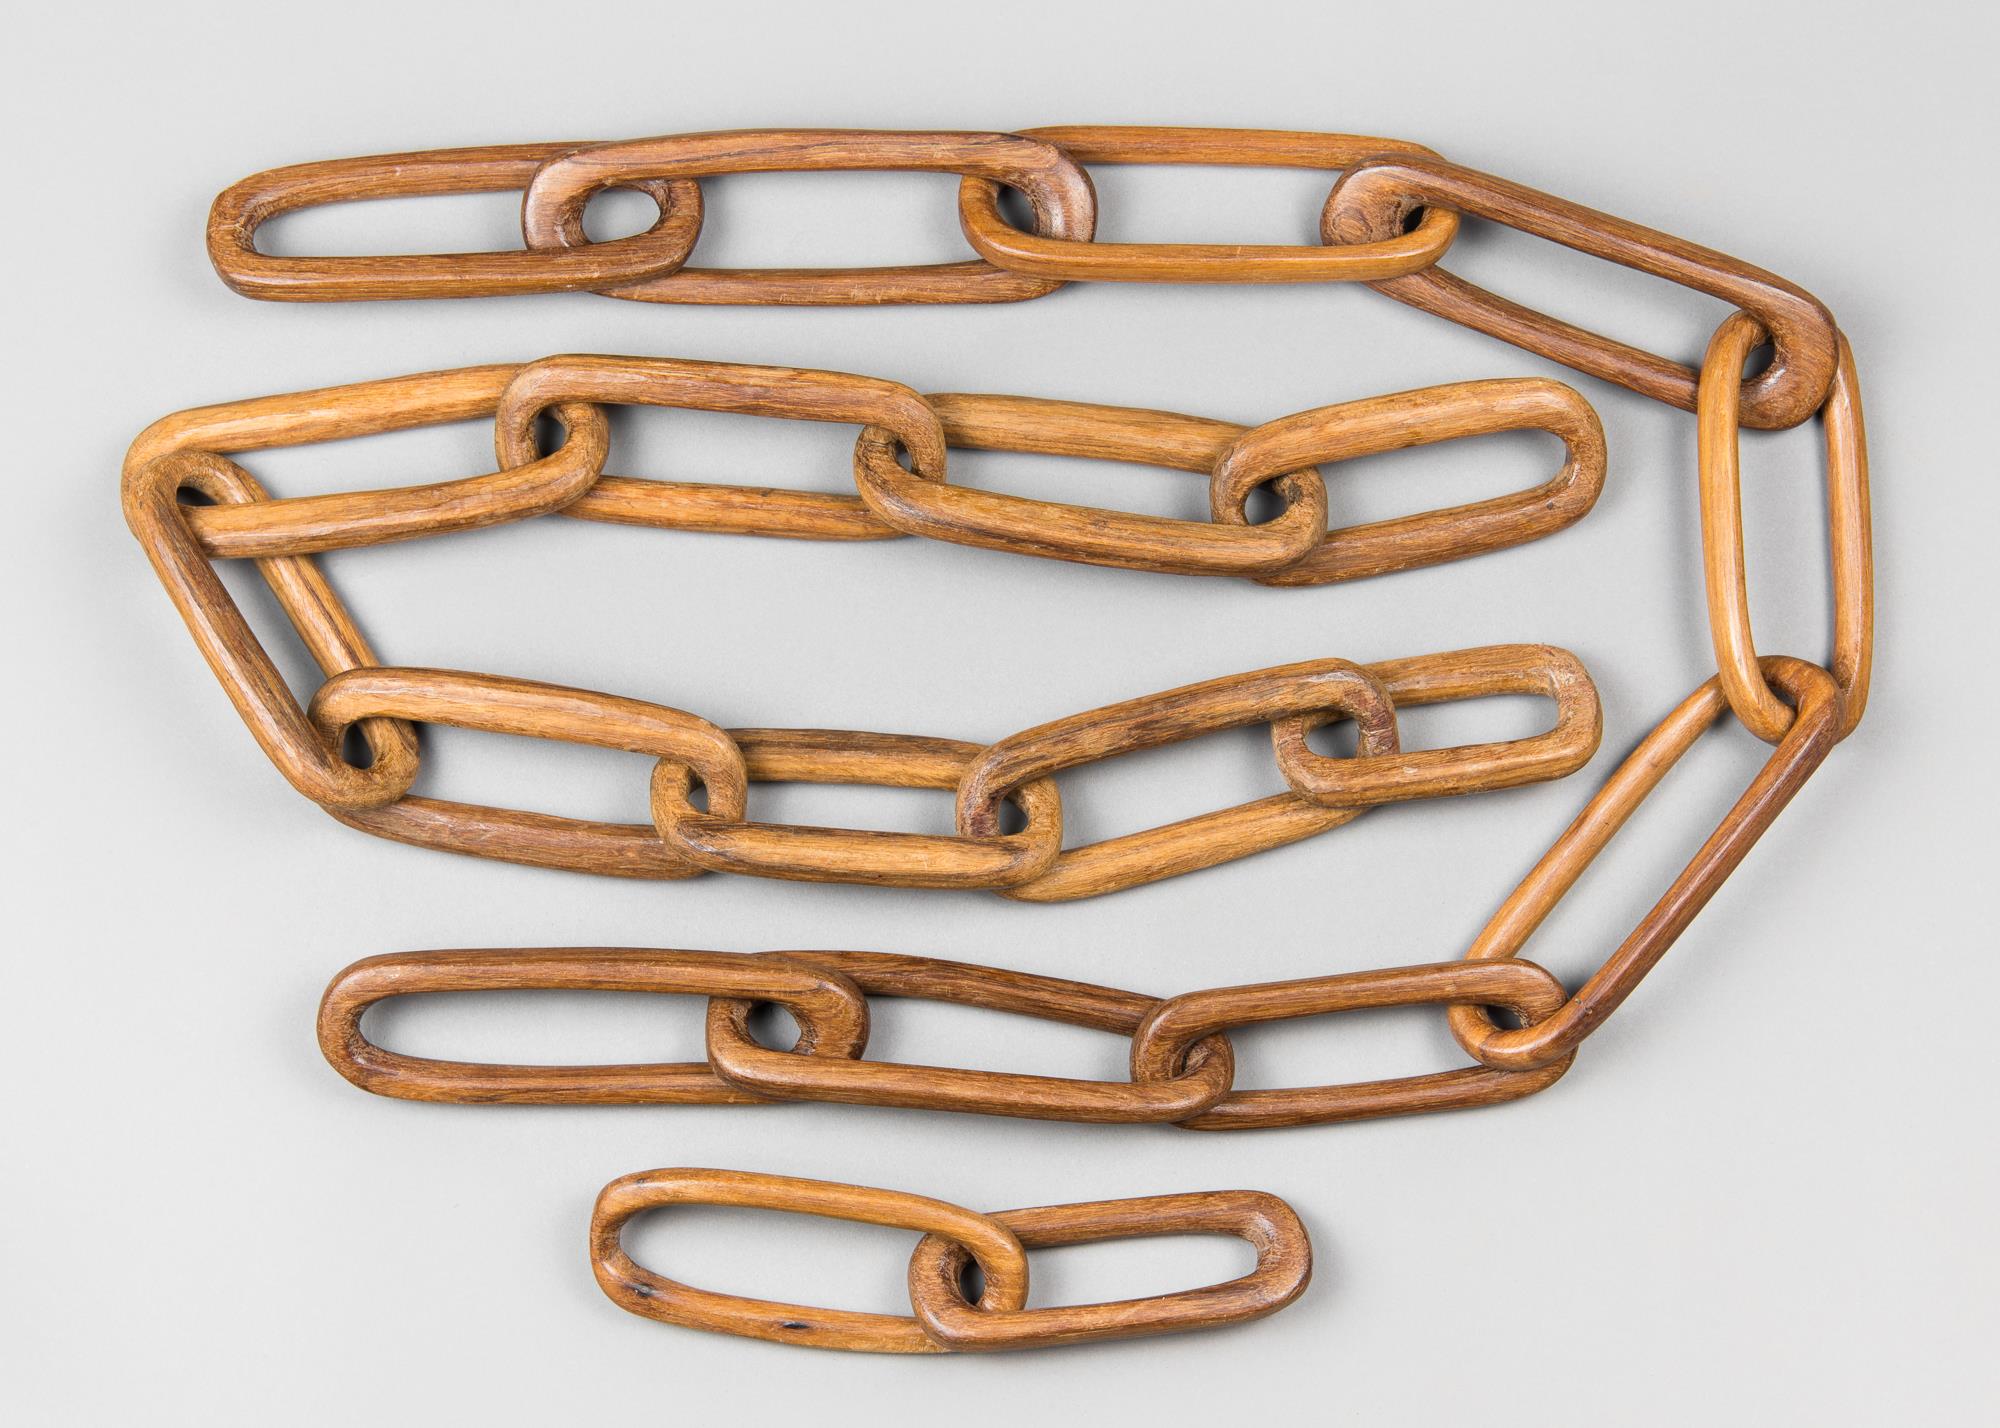 A LATE 20TH CENTURY CARVED WOODEN CHAIN.